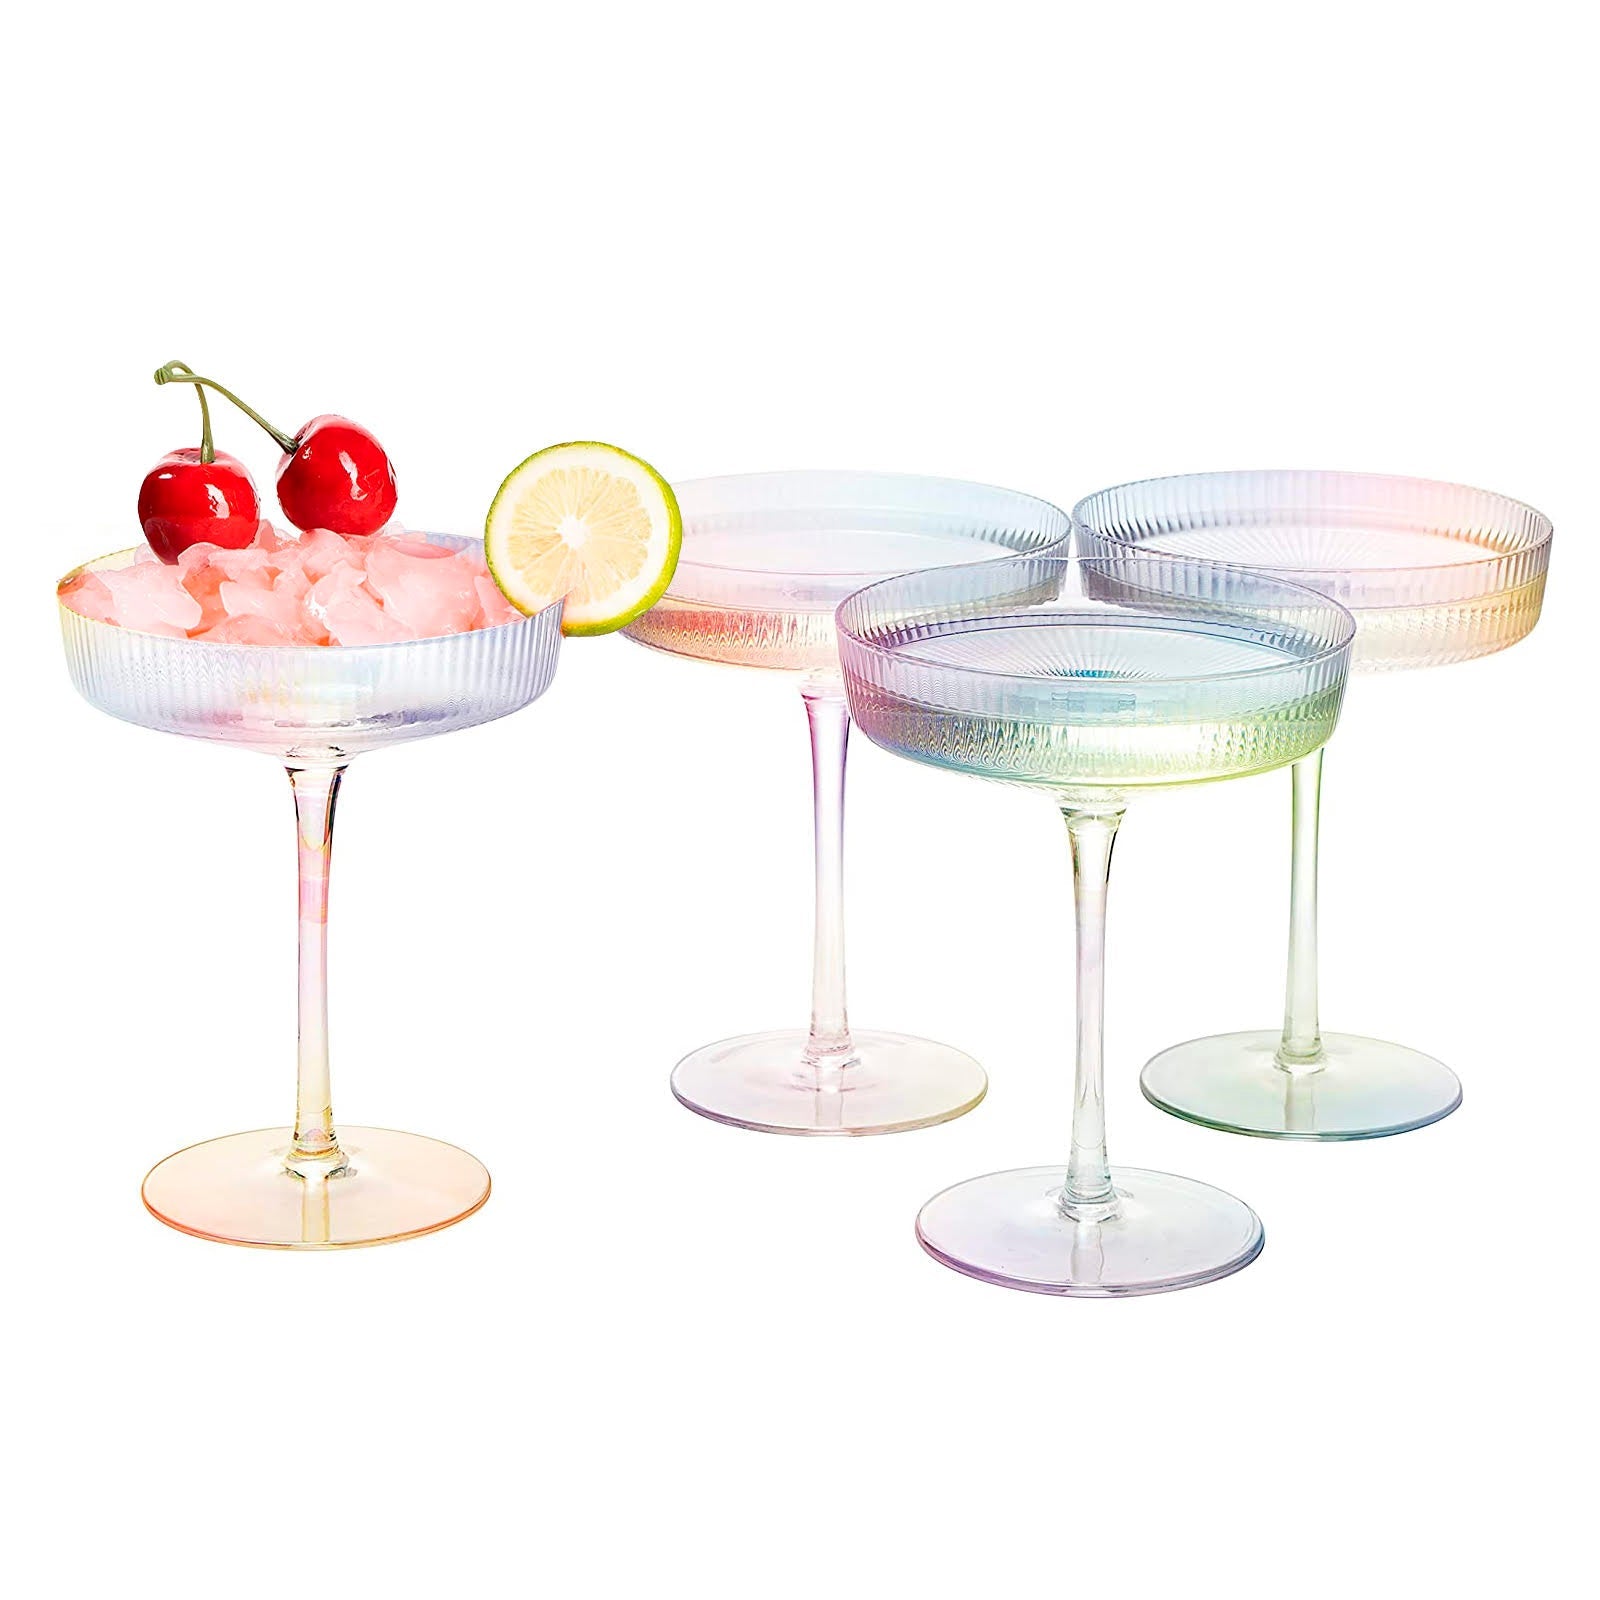 The Wine Savant - Ripple Ribbed Champagne Coupe - Set of 4